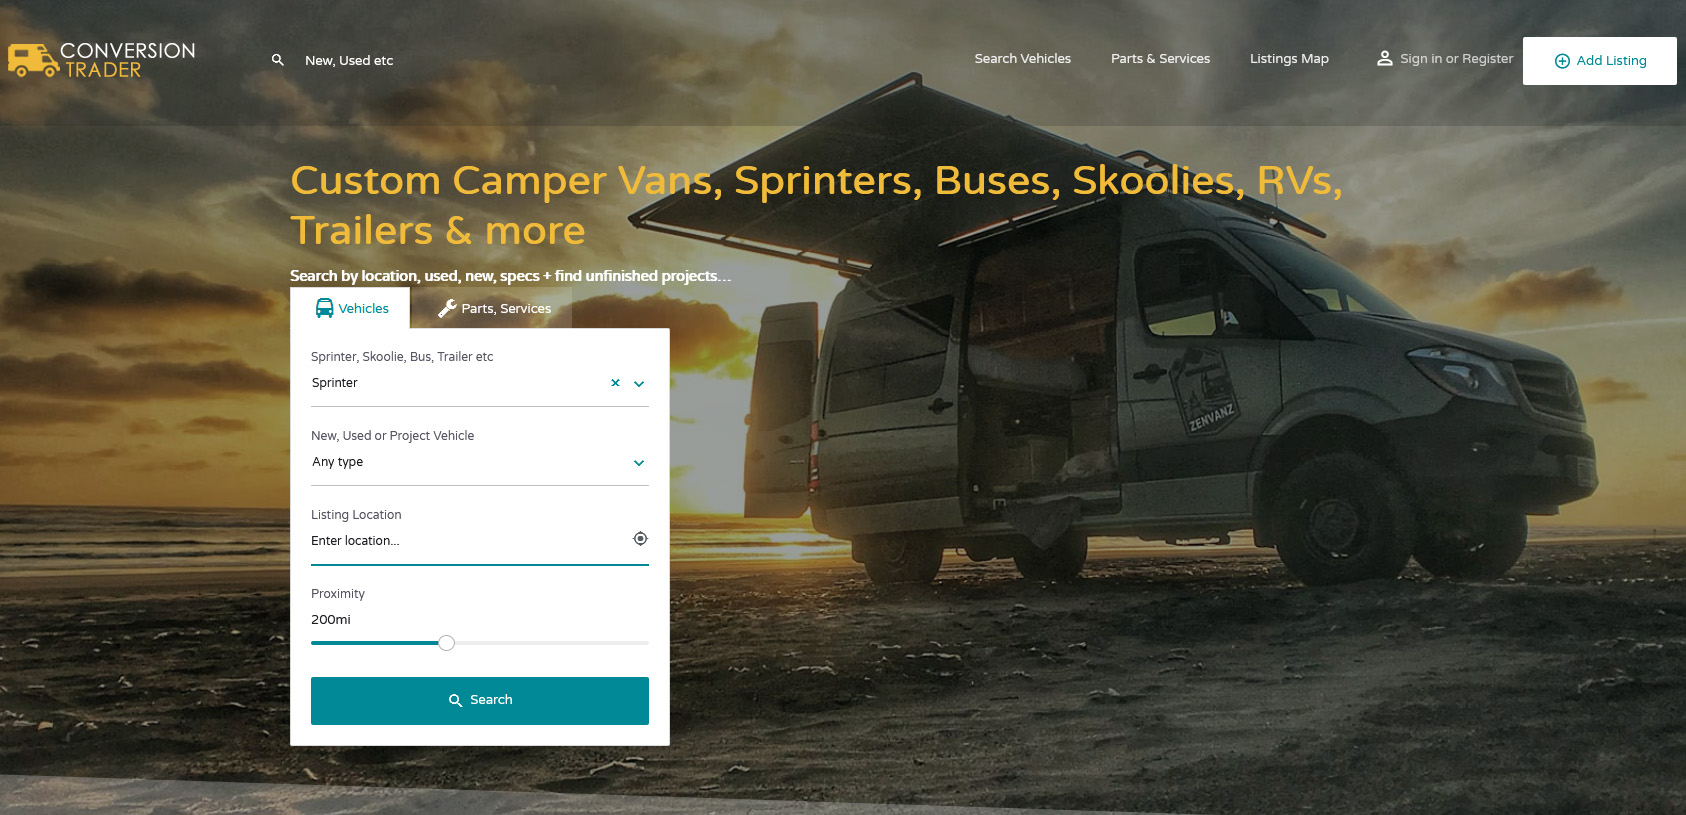 #Vanlife: Conversion Trader adds option for buying & selling vans, RVs, buses, more